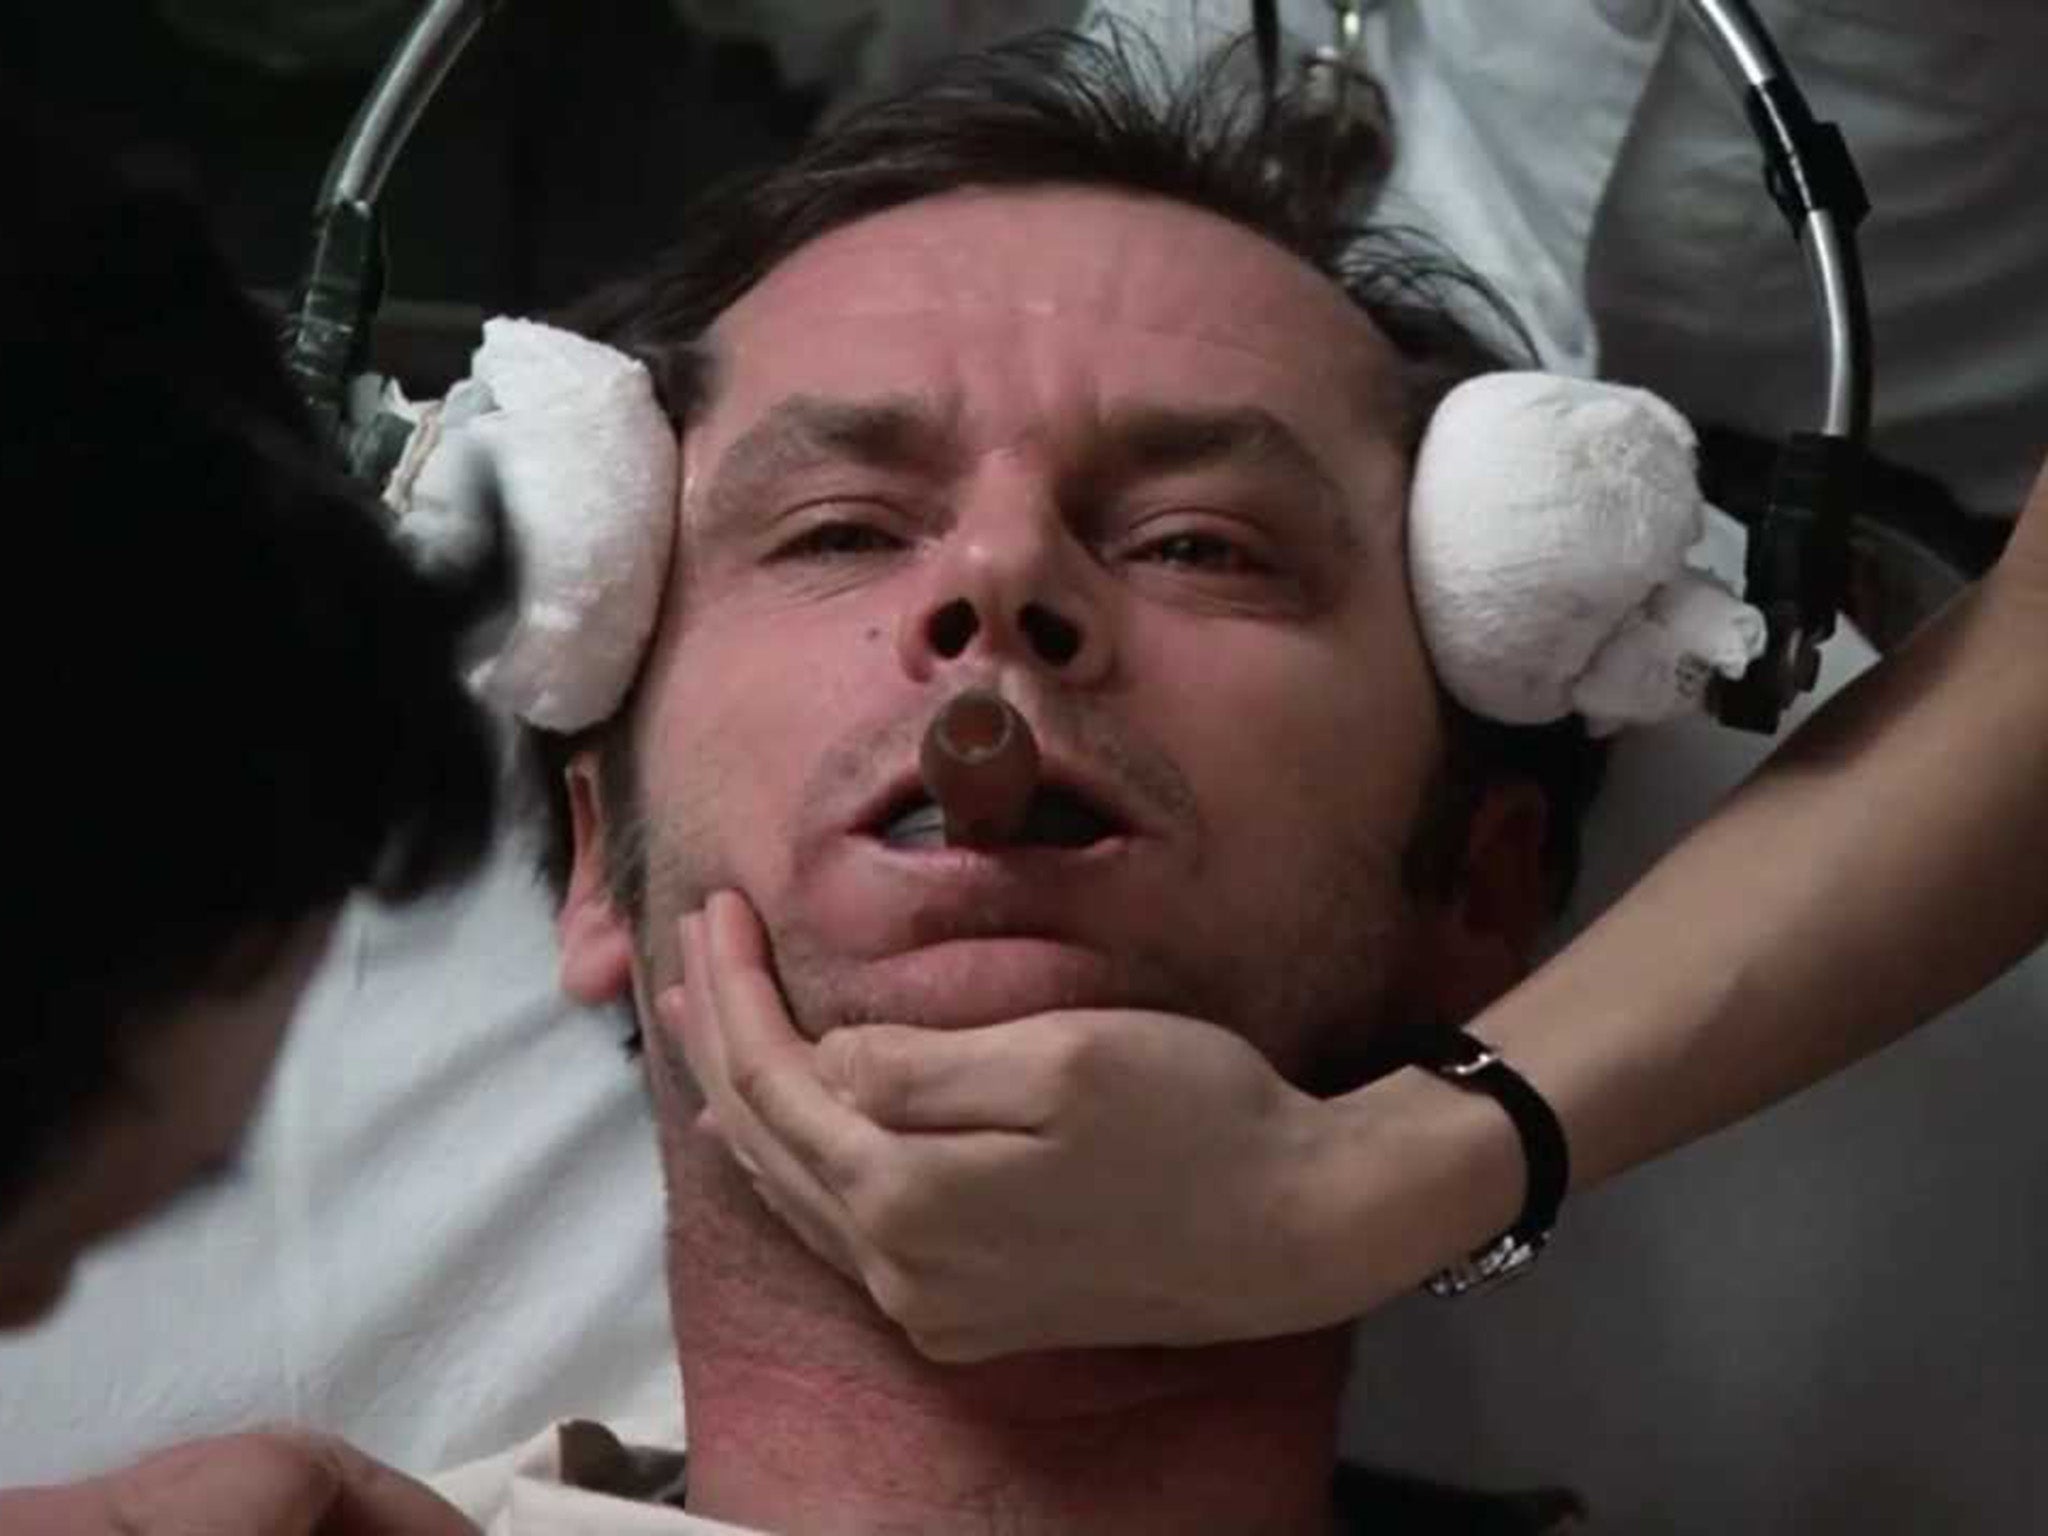 Jack Nicholson’s character Randle McMurphy received electroconvulsive therapy in the 1975 film ‘One Flew Over The Cuckoo’s Nest’